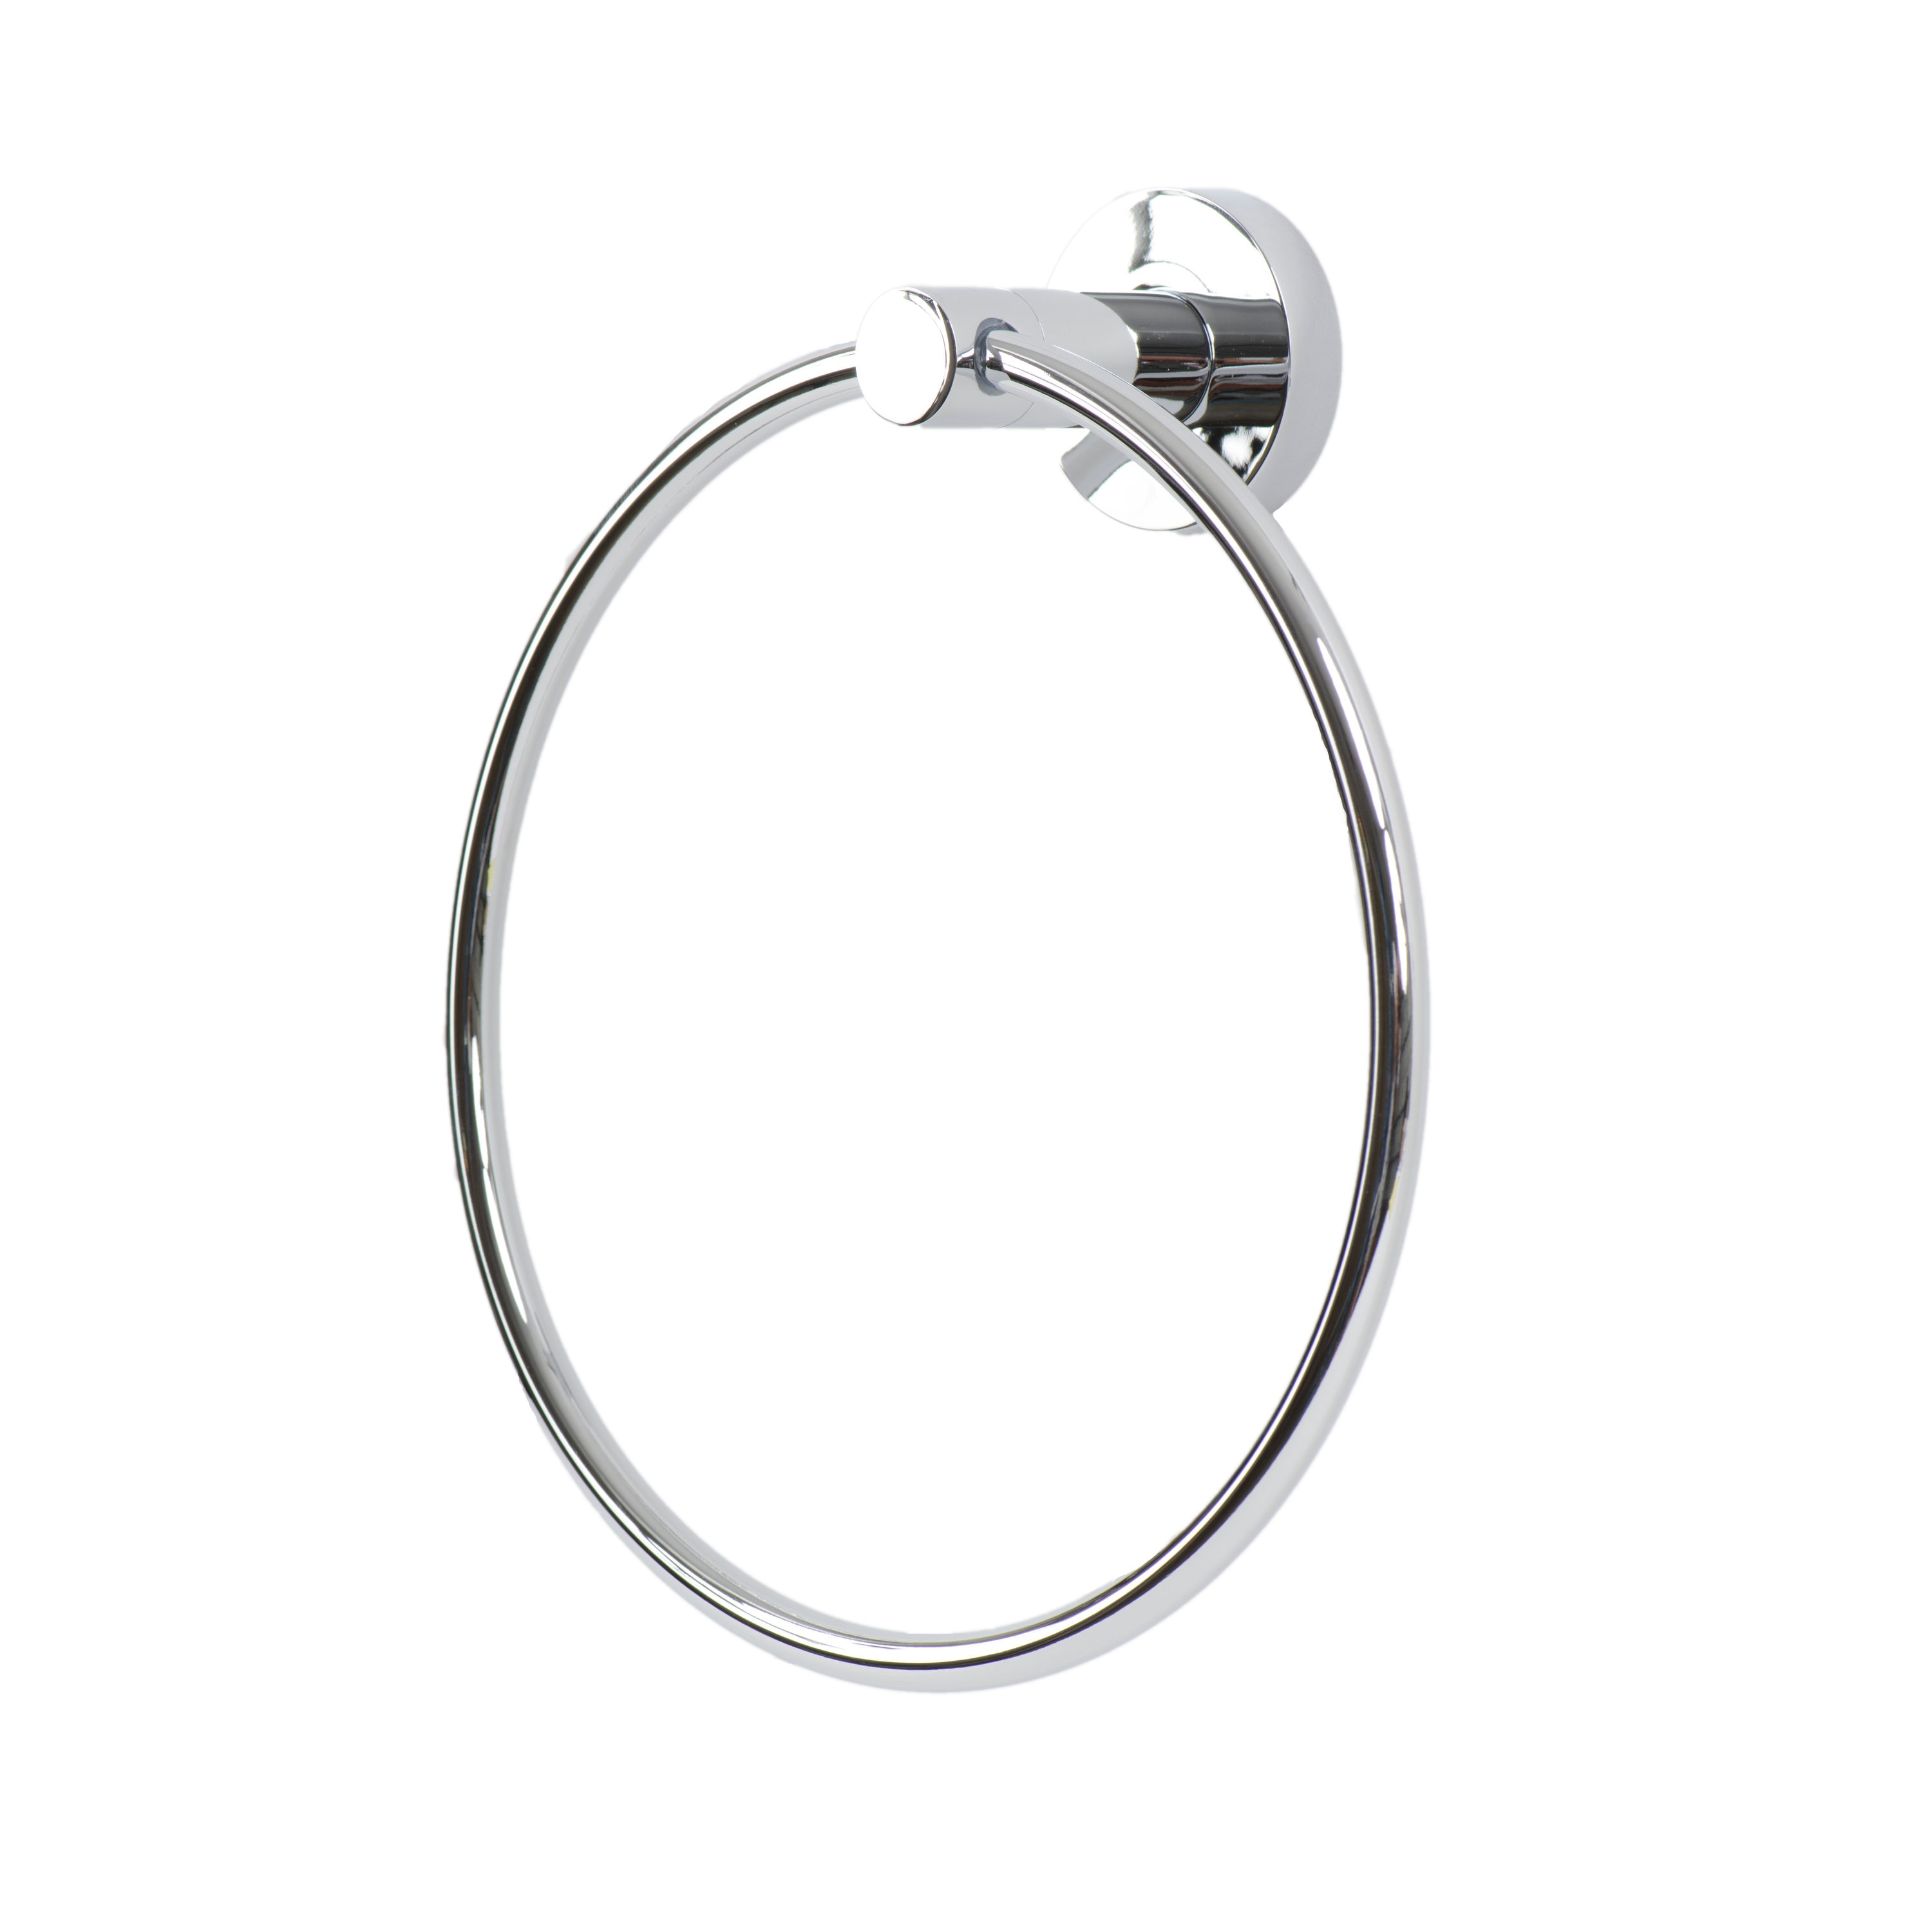 Stainless_Steel Silver Haceka Towel Ring Kosmos of Chrome 